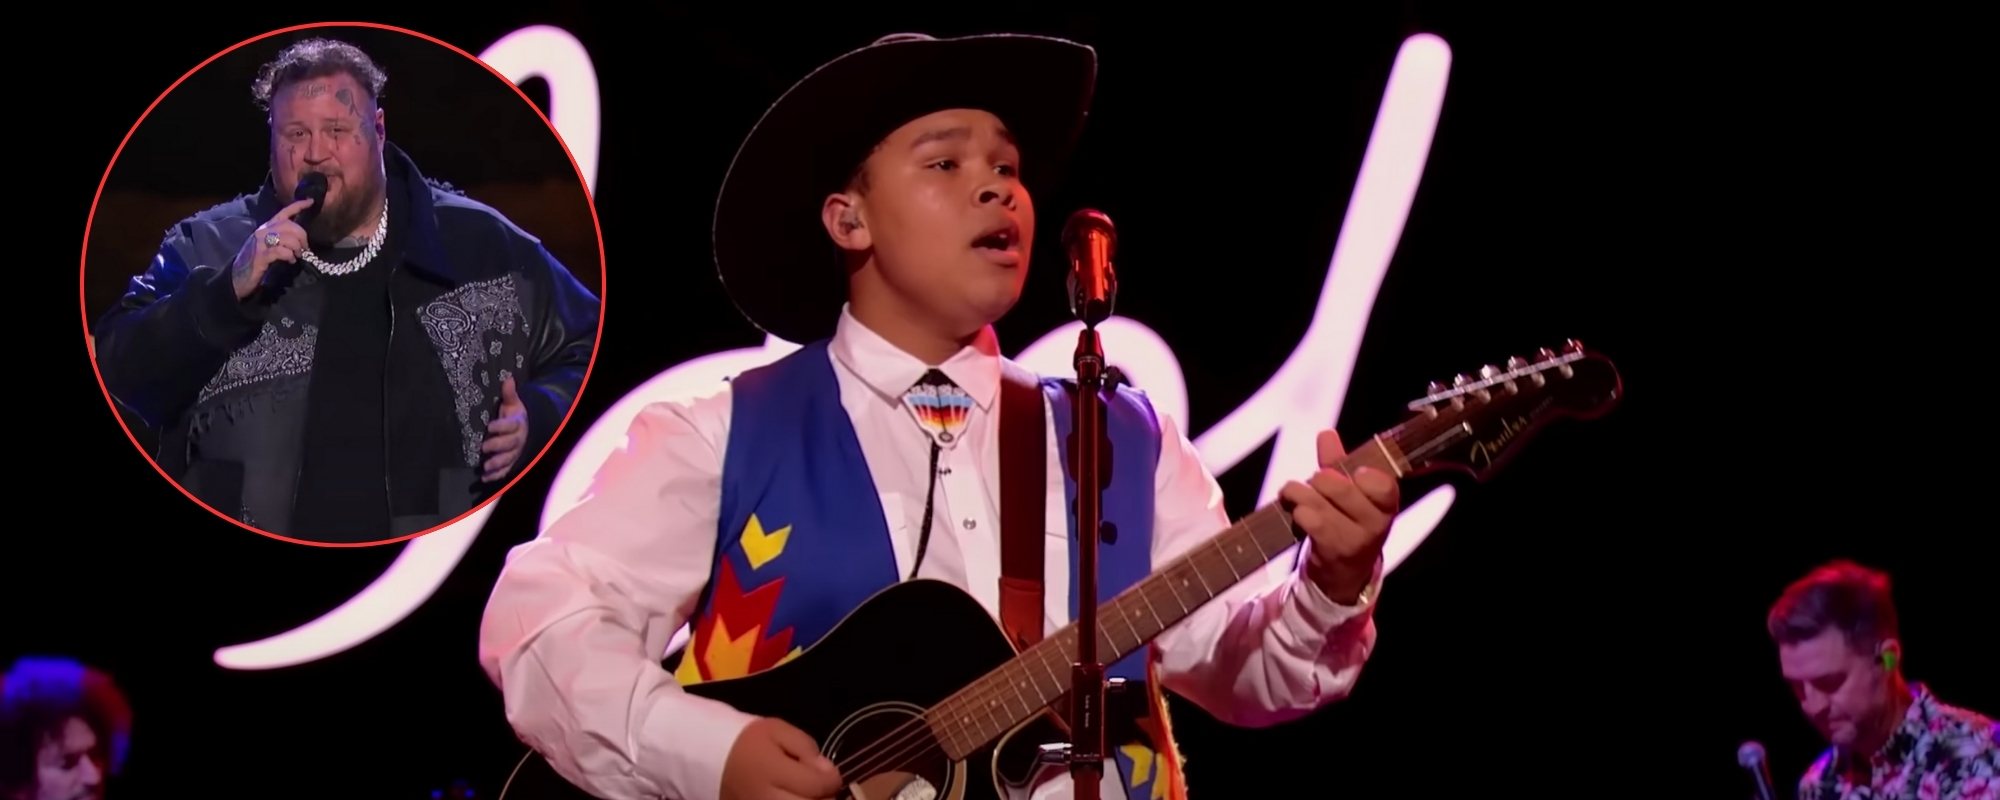 Triston Harper’s Breathtaking ‘American Idol’ Performance Has Jelly Roll Convinced the 15-Year-Old Phenom Can Win It All